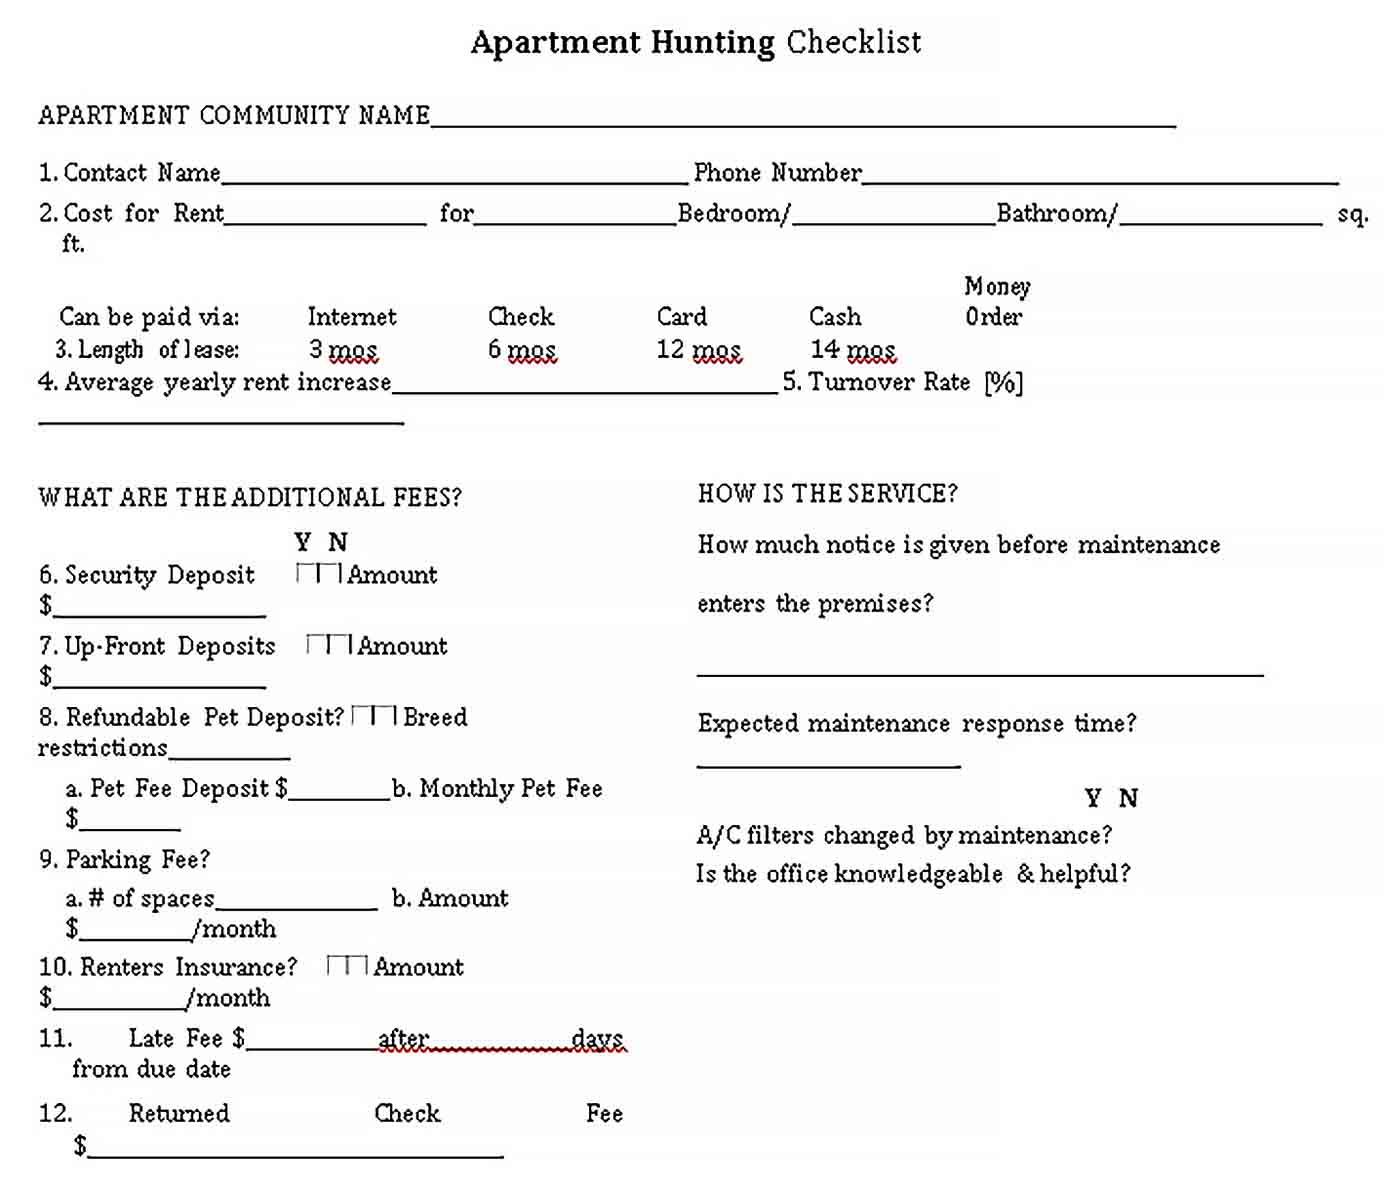 New Apartment Checklist Template - bcjournal For Apartment Hunting Checklist Template